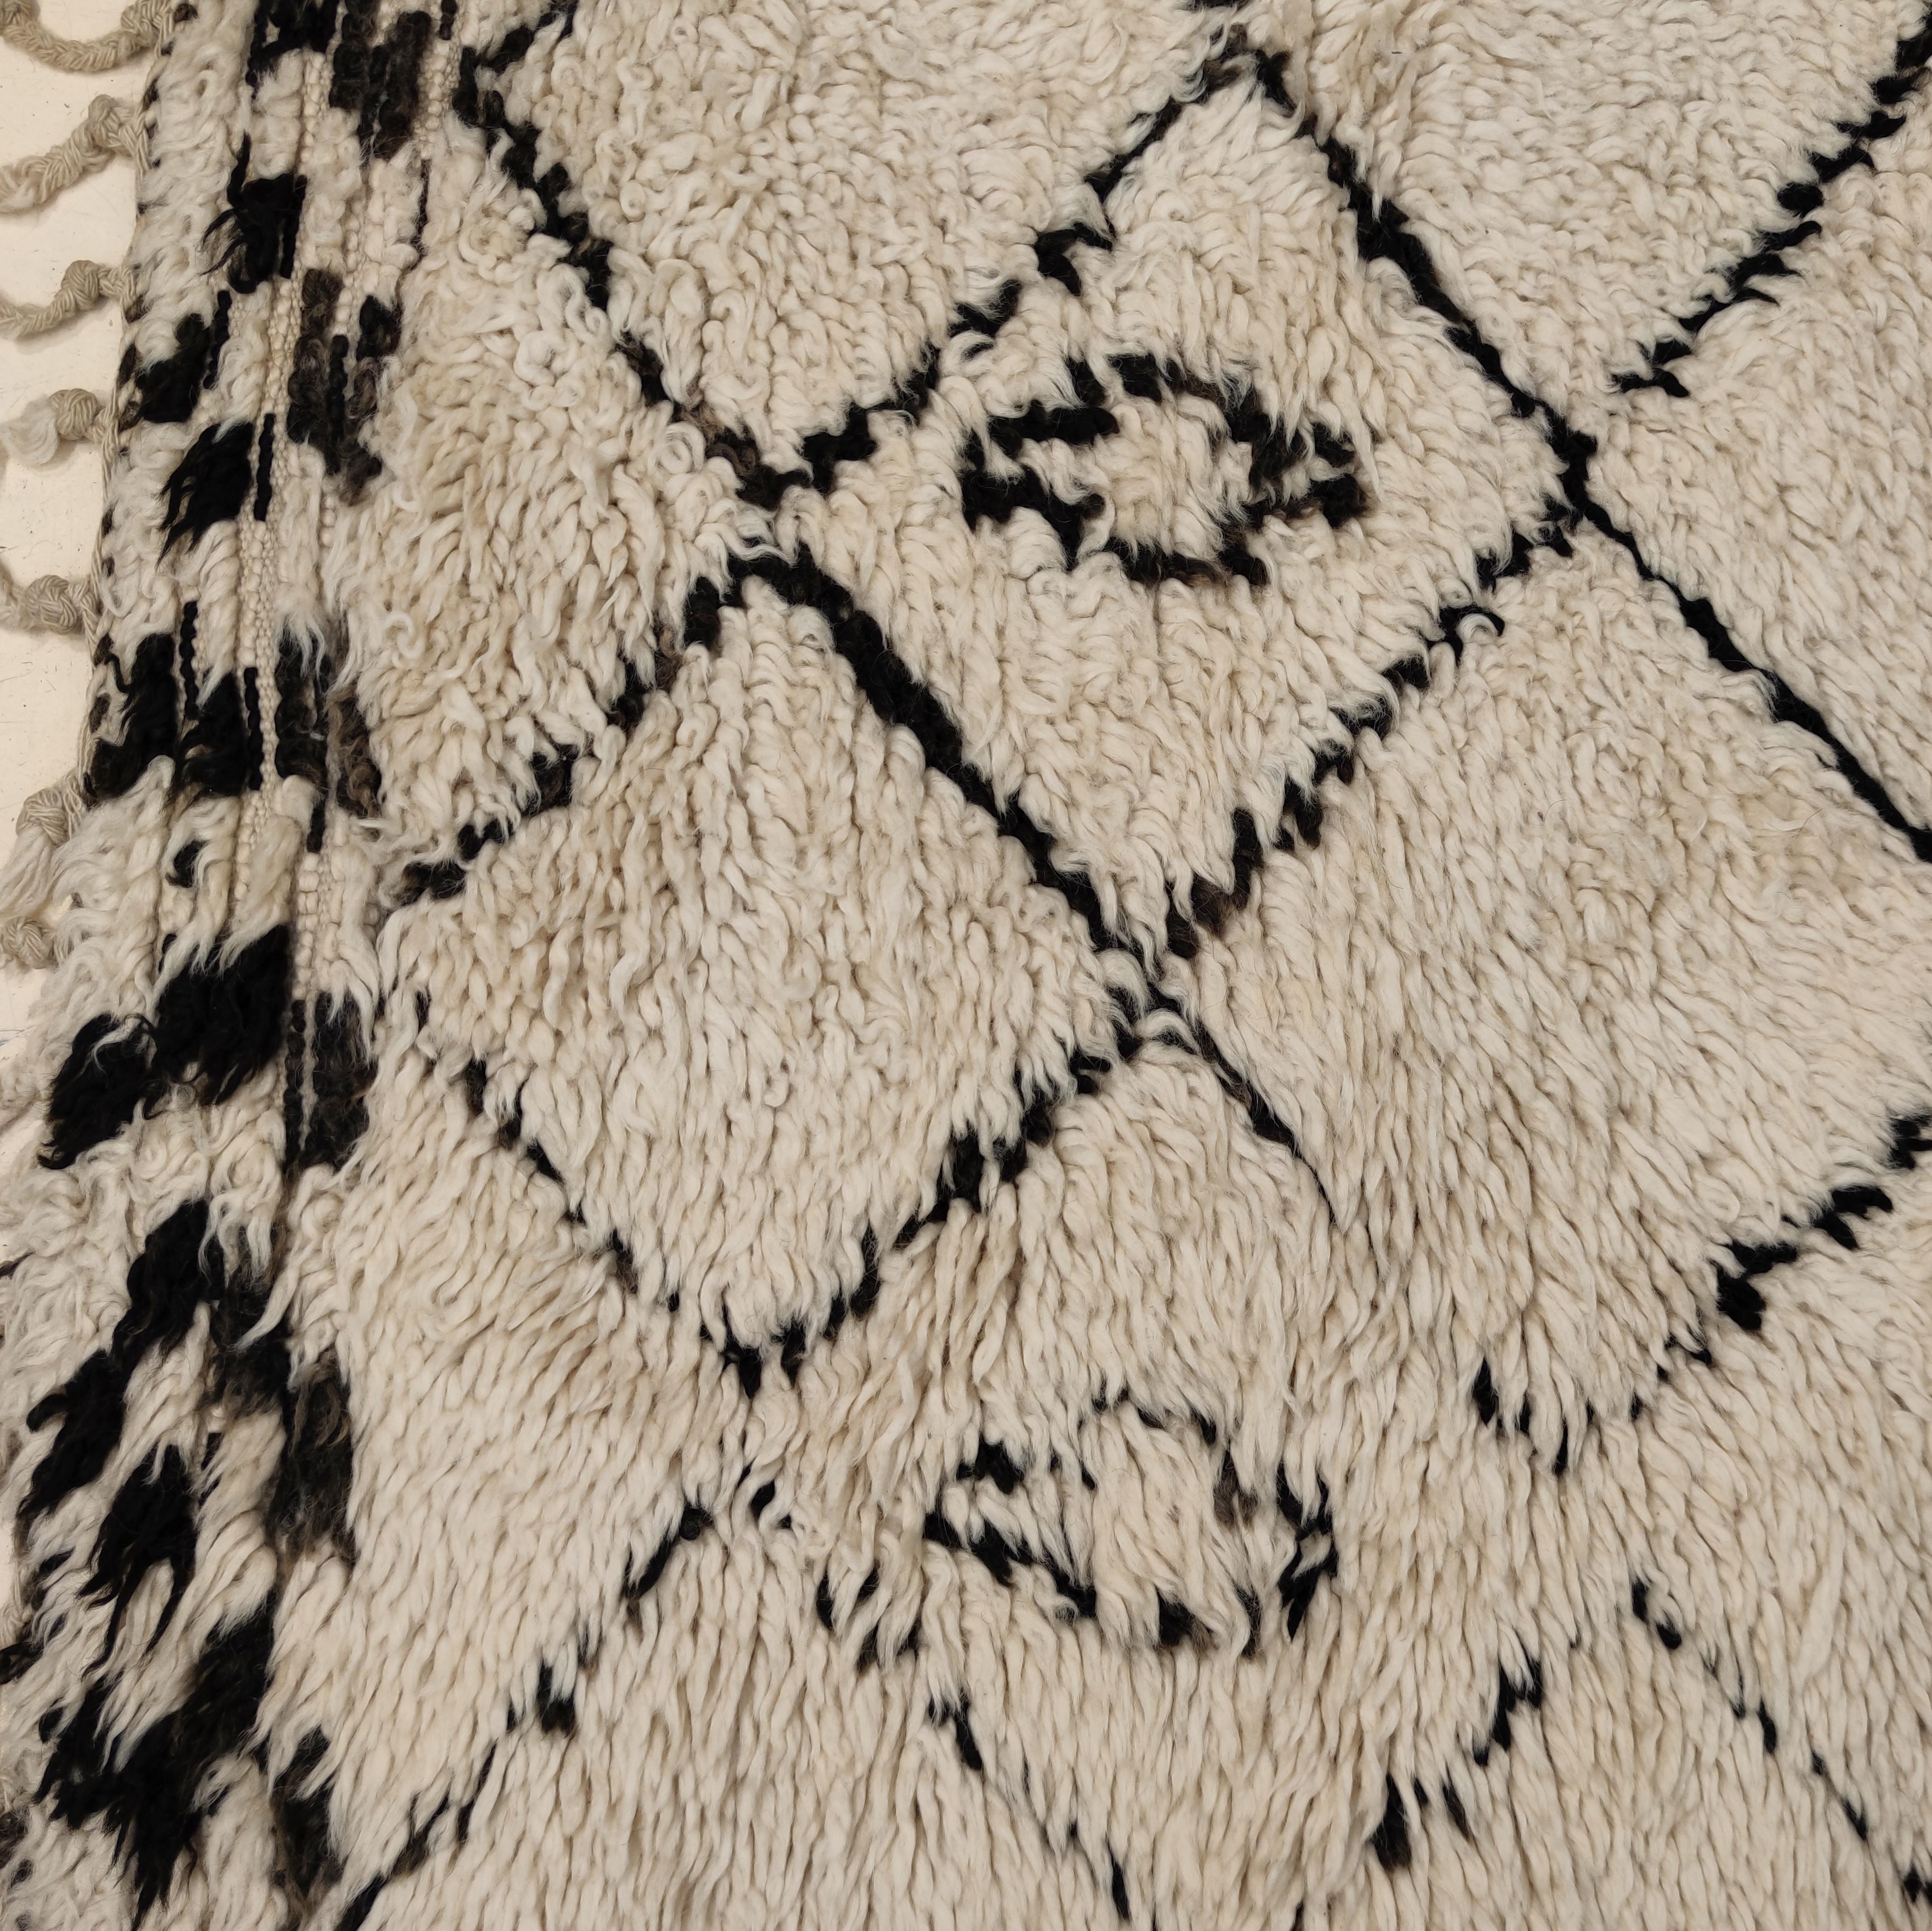 The rugs of the Beni Ouarain tribal confederacy differ from other Berber weavings in that they are woven almost exclusively on an ivory background and decorated with abstract geometric motifs in undyed natural brown/black wool. The pattern is